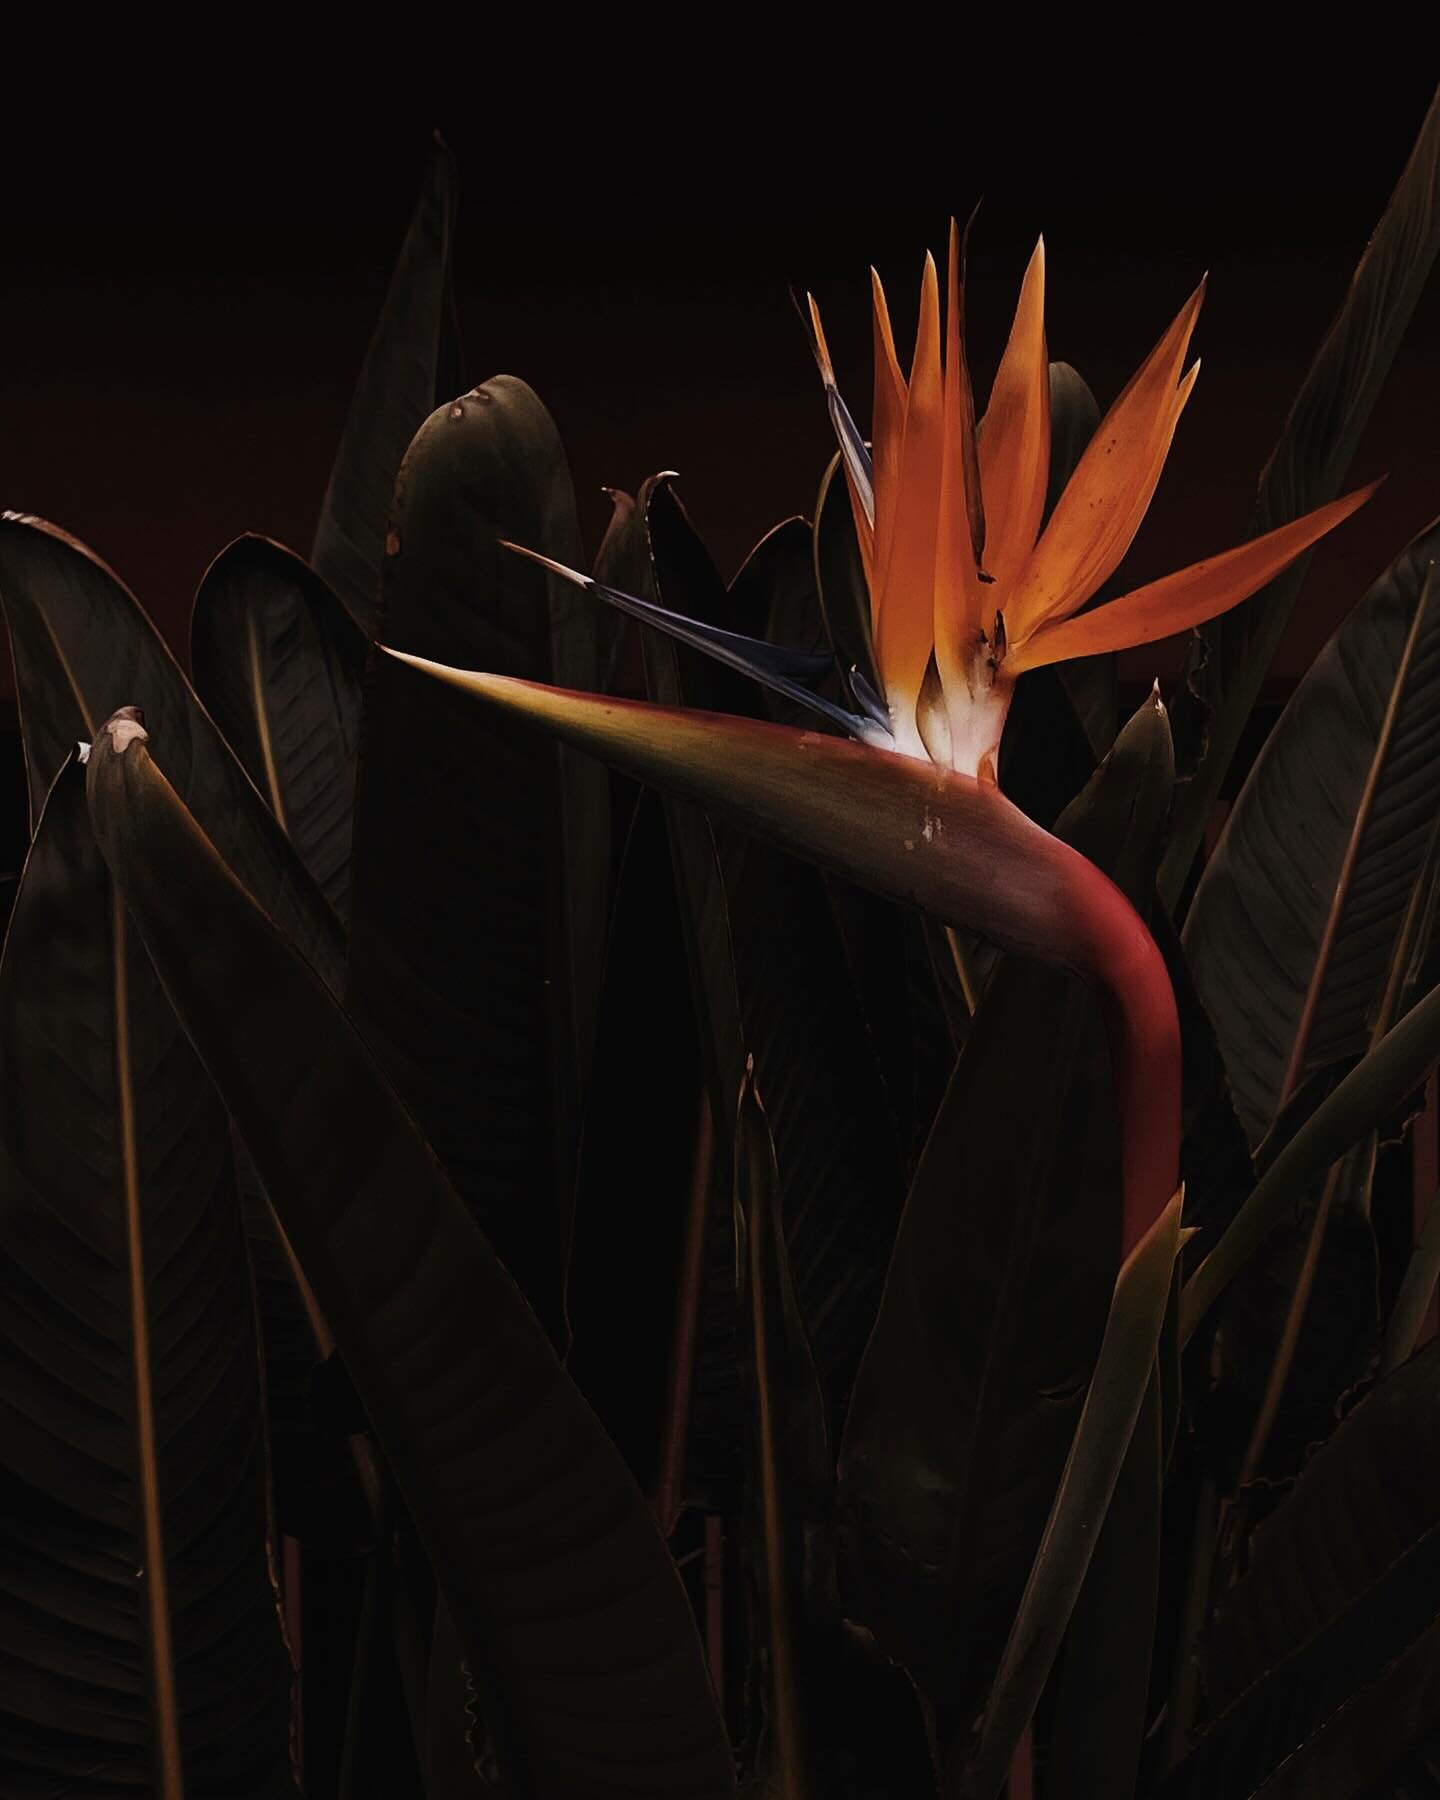 Will always take pics of a bird of paradise flower. ALWAYS.